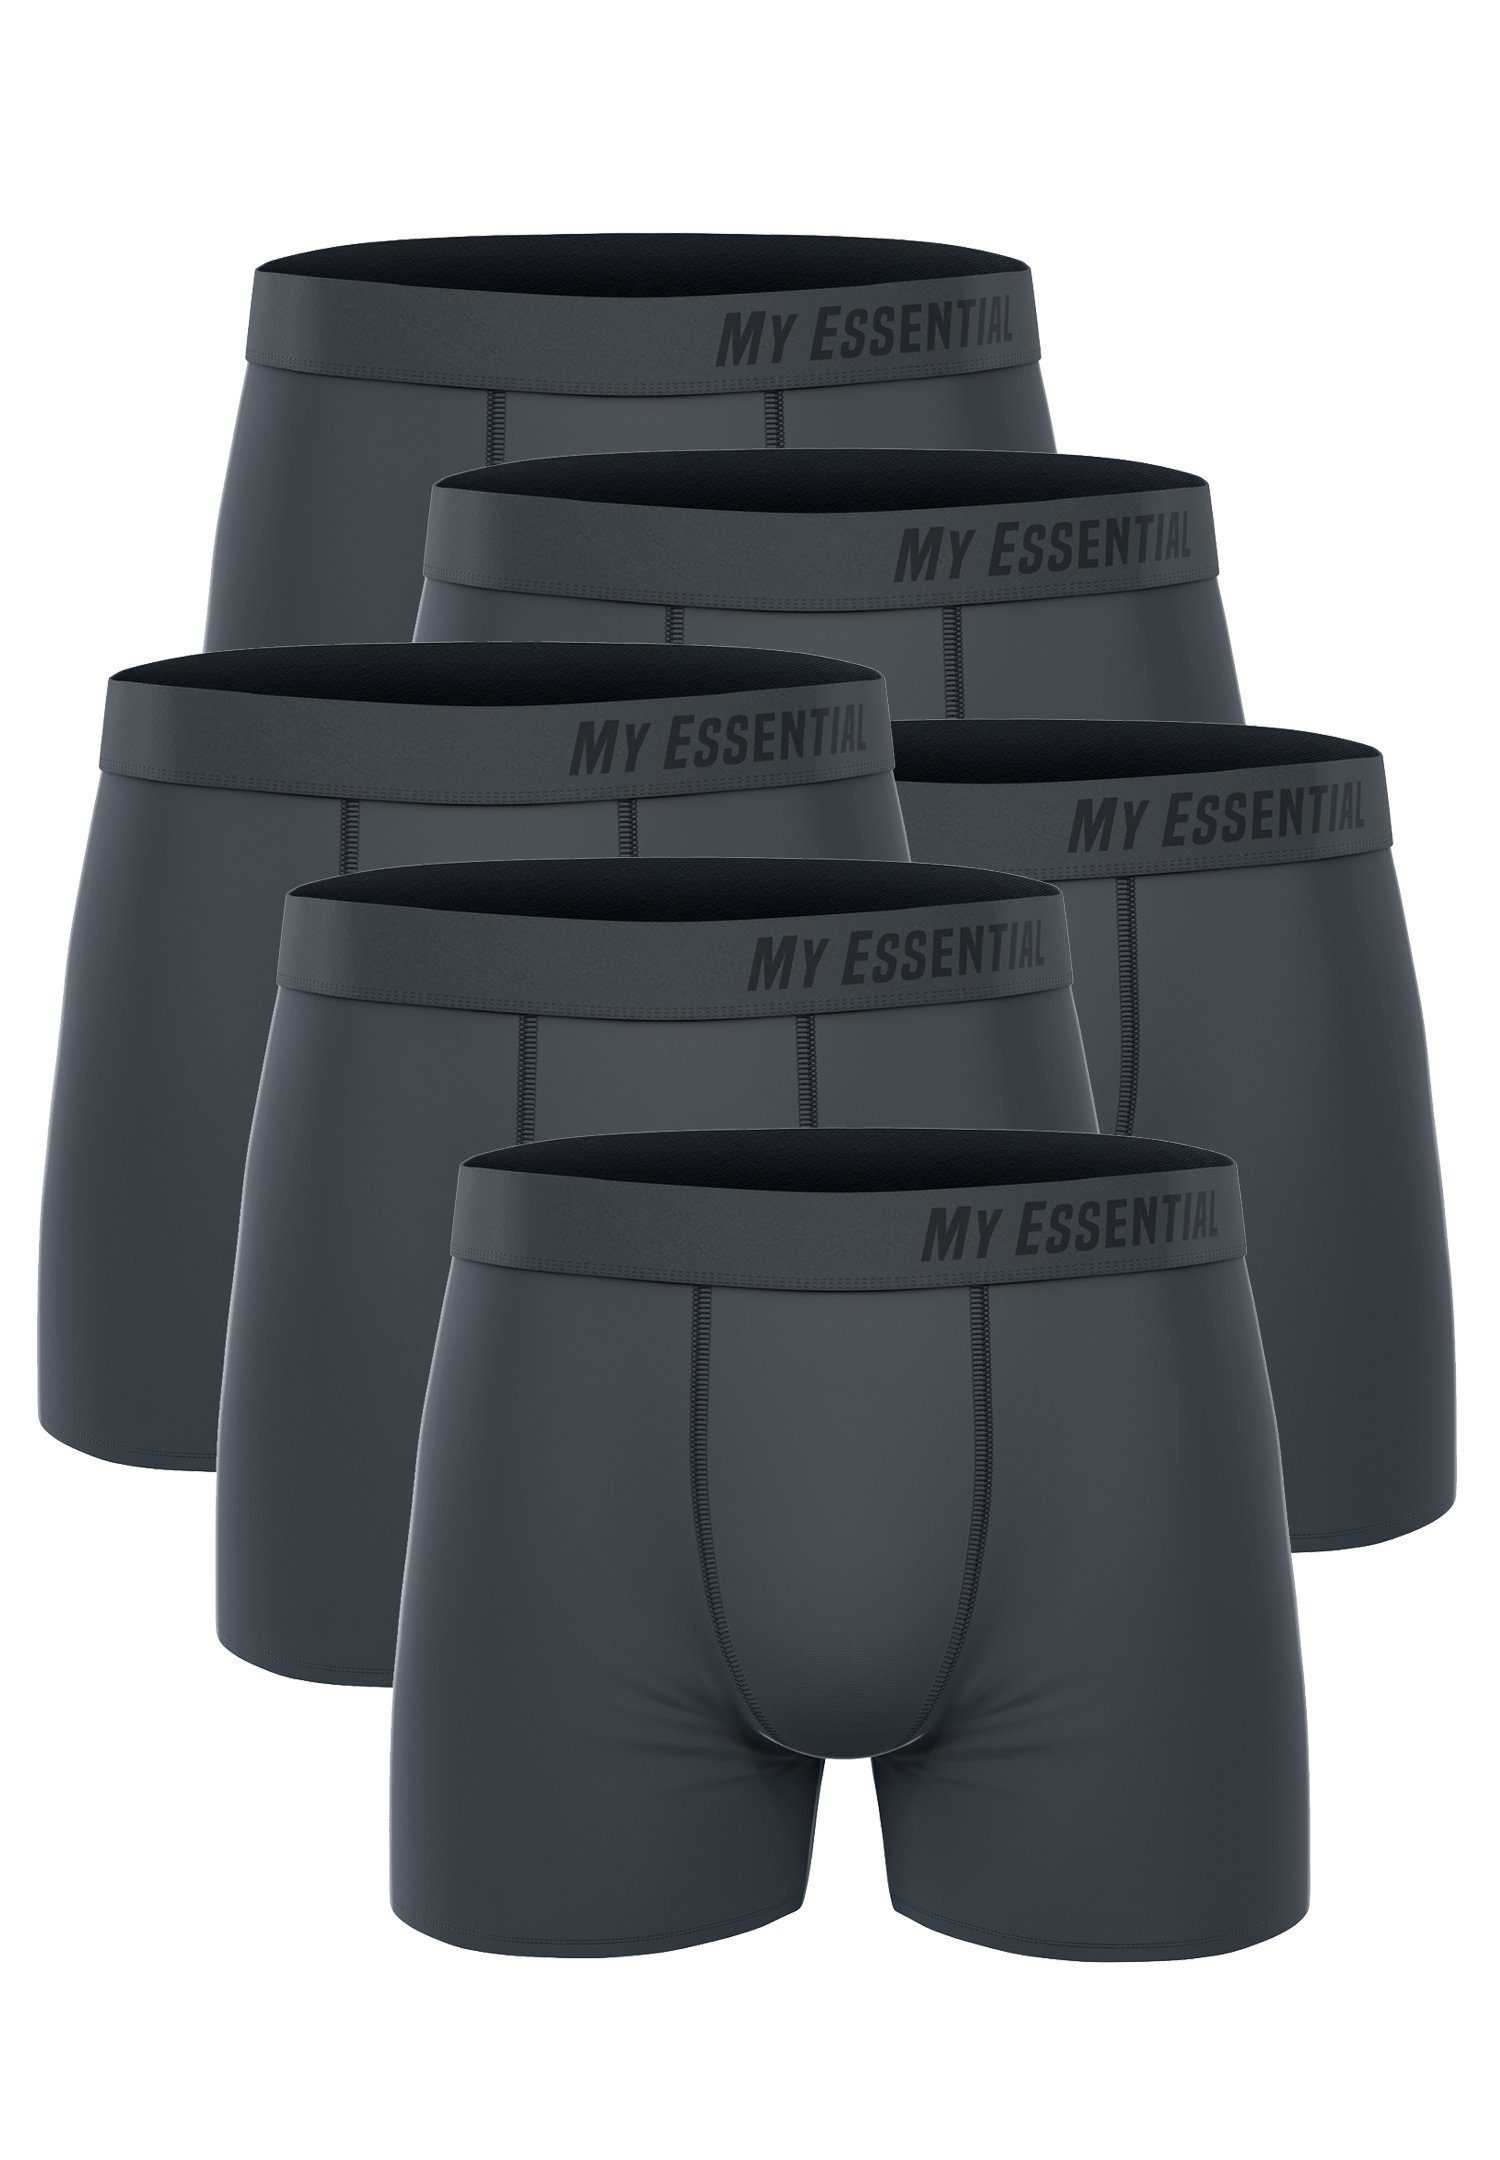 Essential My 6er-Pack) 6-St., My Grey Boxershorts Essential 6 Boxers Cotton Pack Bio (Spar-Pack, Clothing